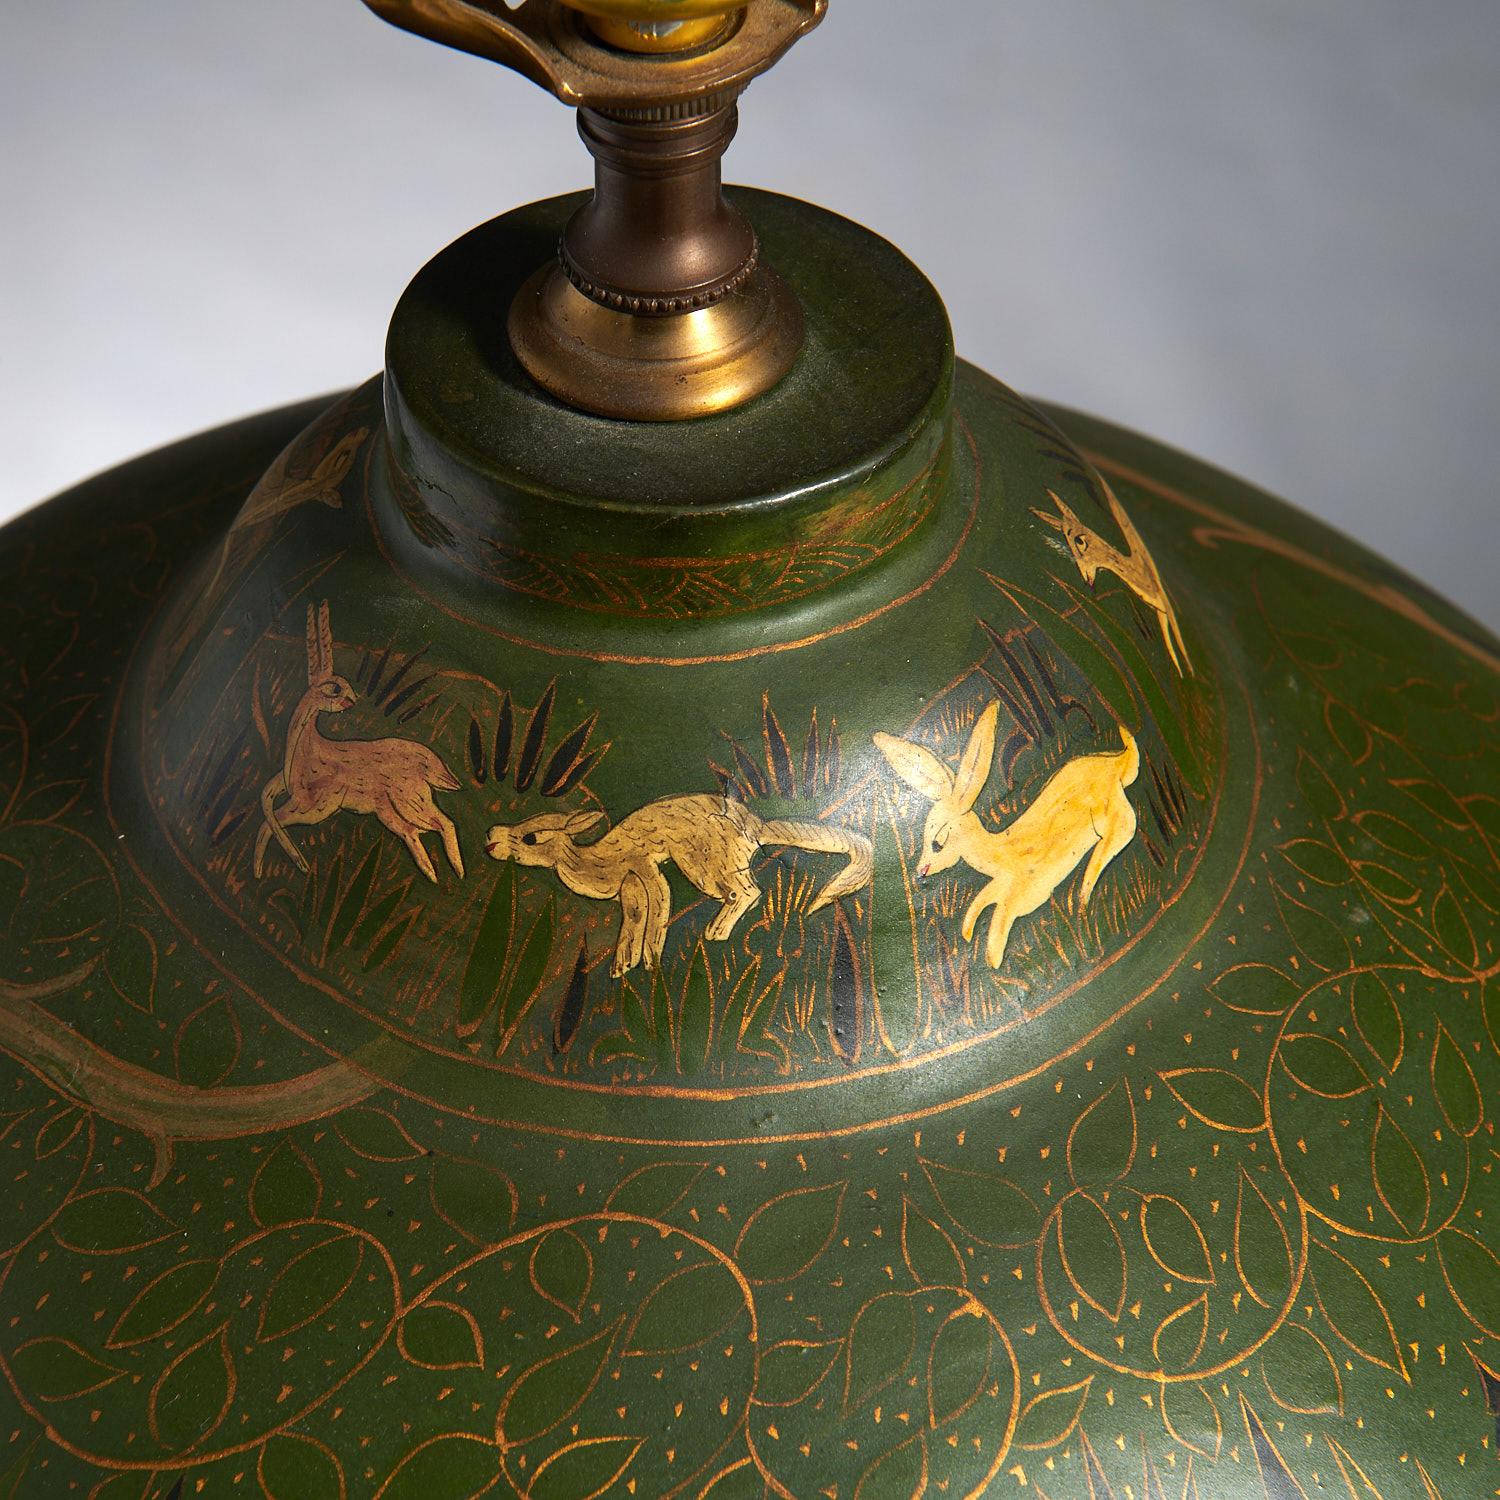 British Colonial Large Scale 20th Century Persian Lacquerware Table Lamp For Sale